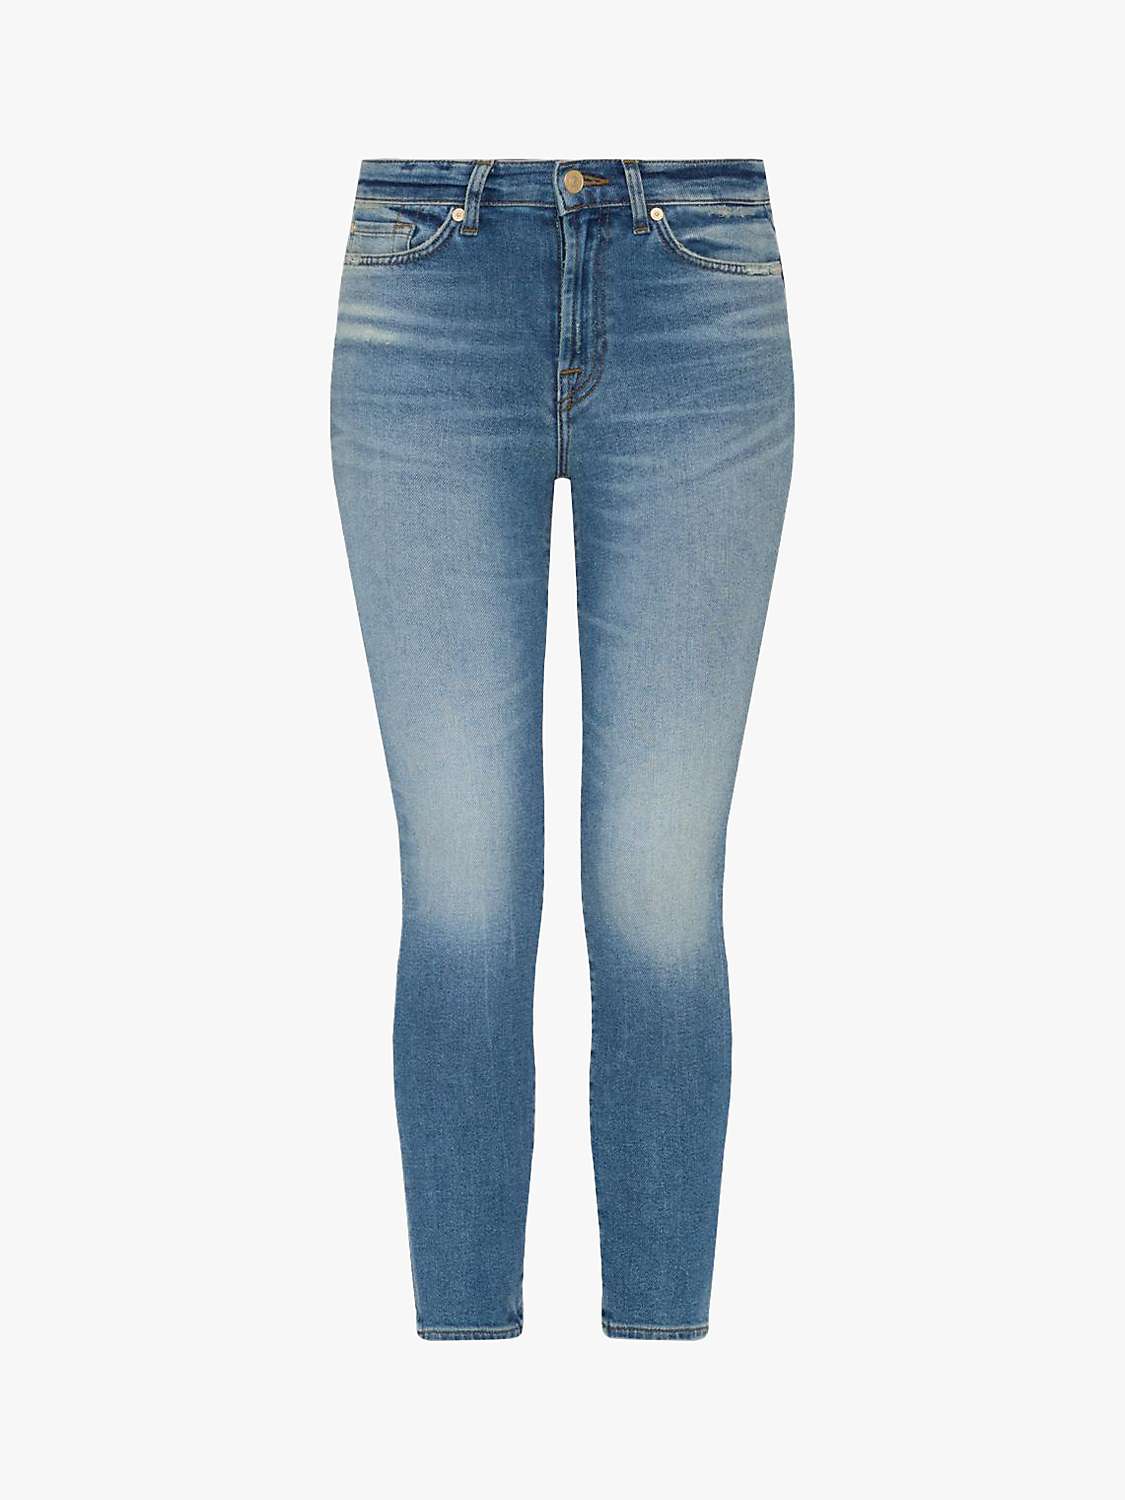 Buy 7 For All Mankind Roxanne Slim Fit Ankle Jeans, Mid Blue Online at johnlewis.com